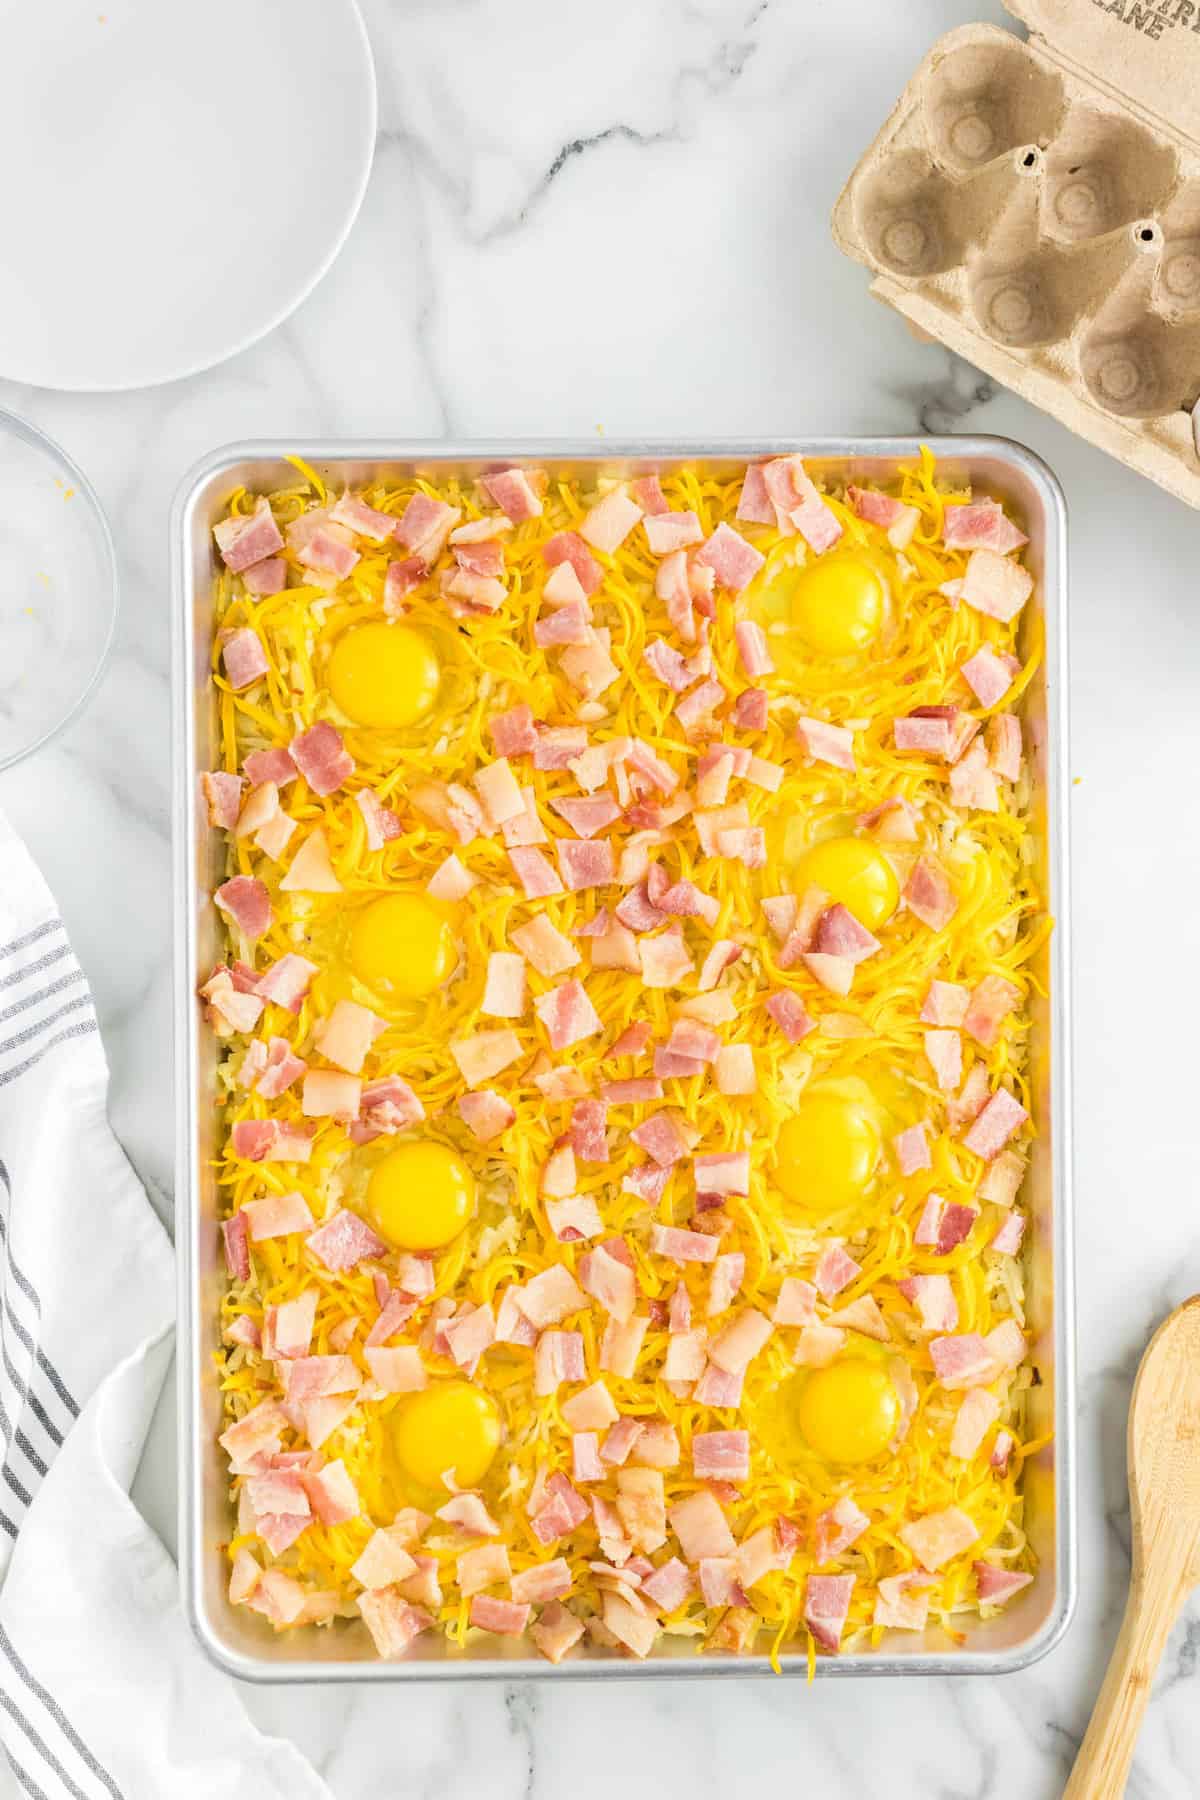 Topping Sheet Pan Breakfast with Bacon